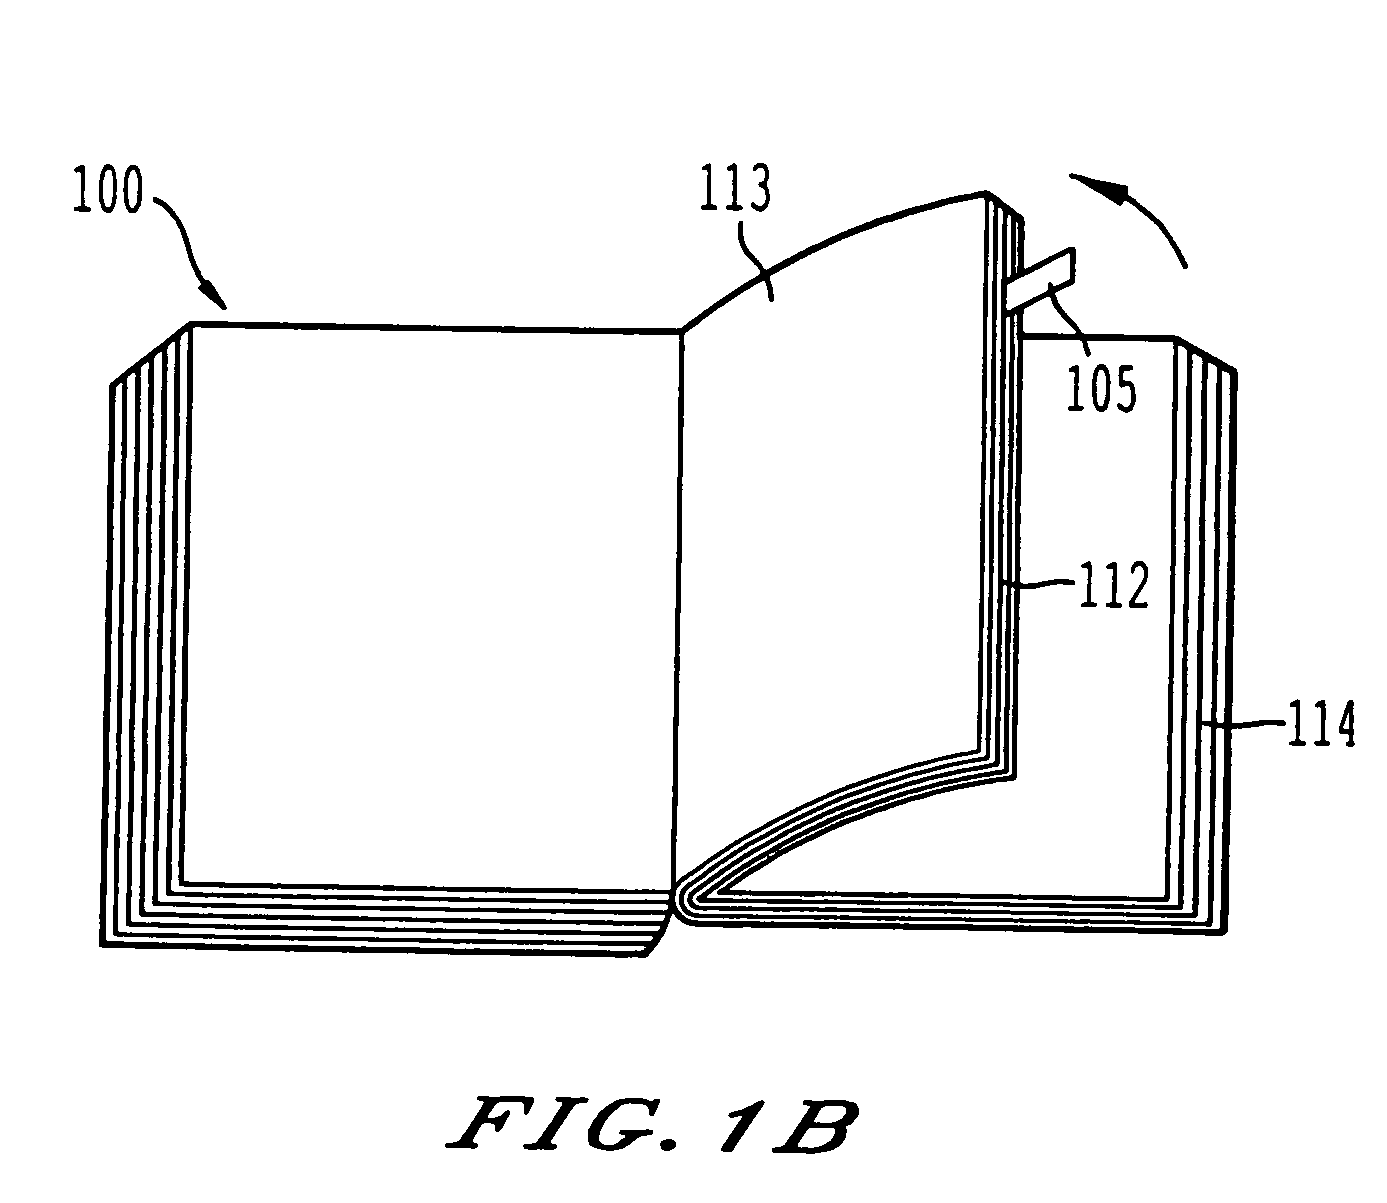 Method, system, apparatus, and computer program product for controlling and browsing a virtual book